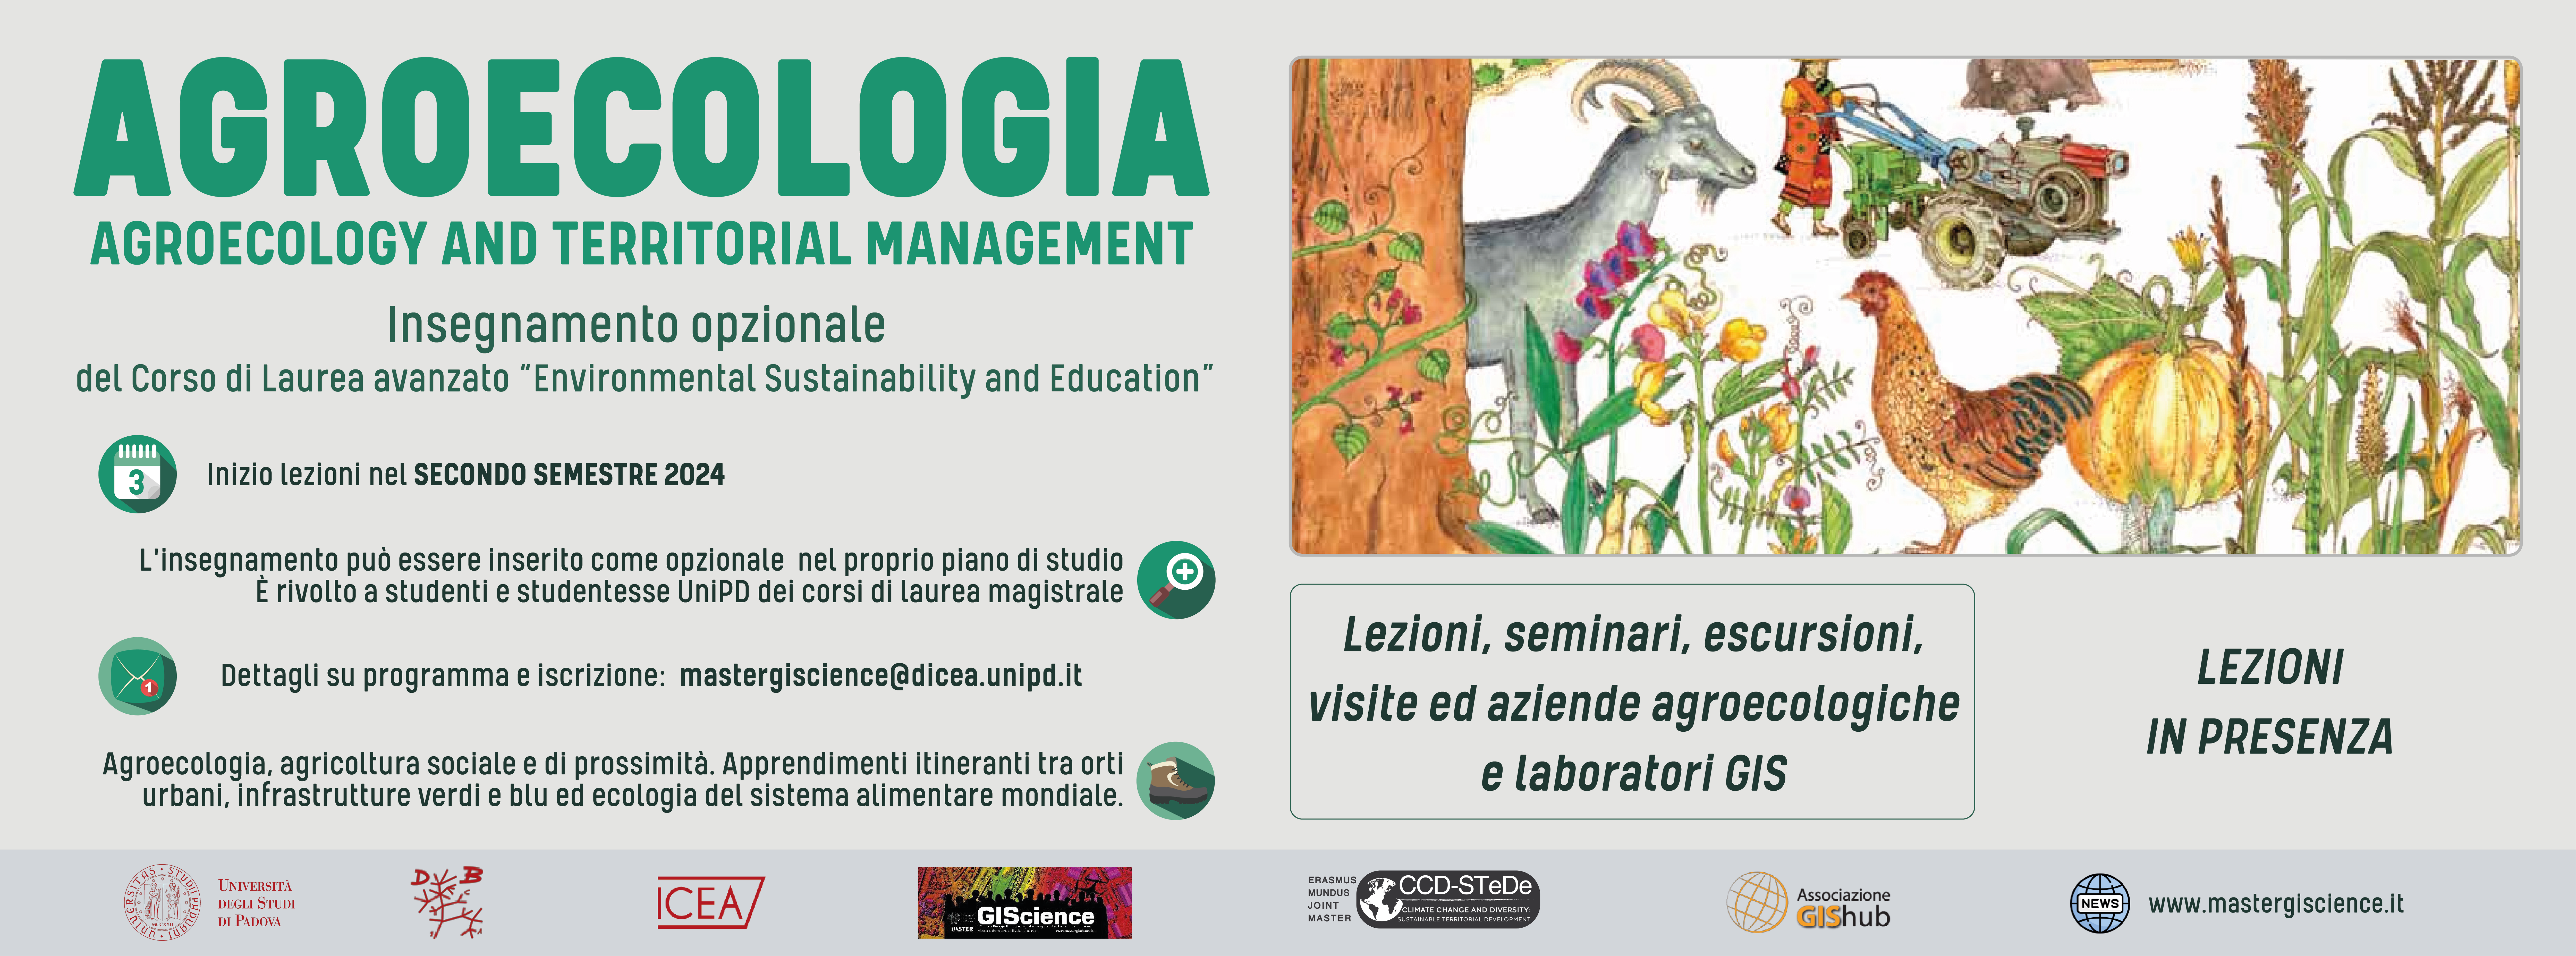 Corso di Agroecologia – Agroecology and territorial management